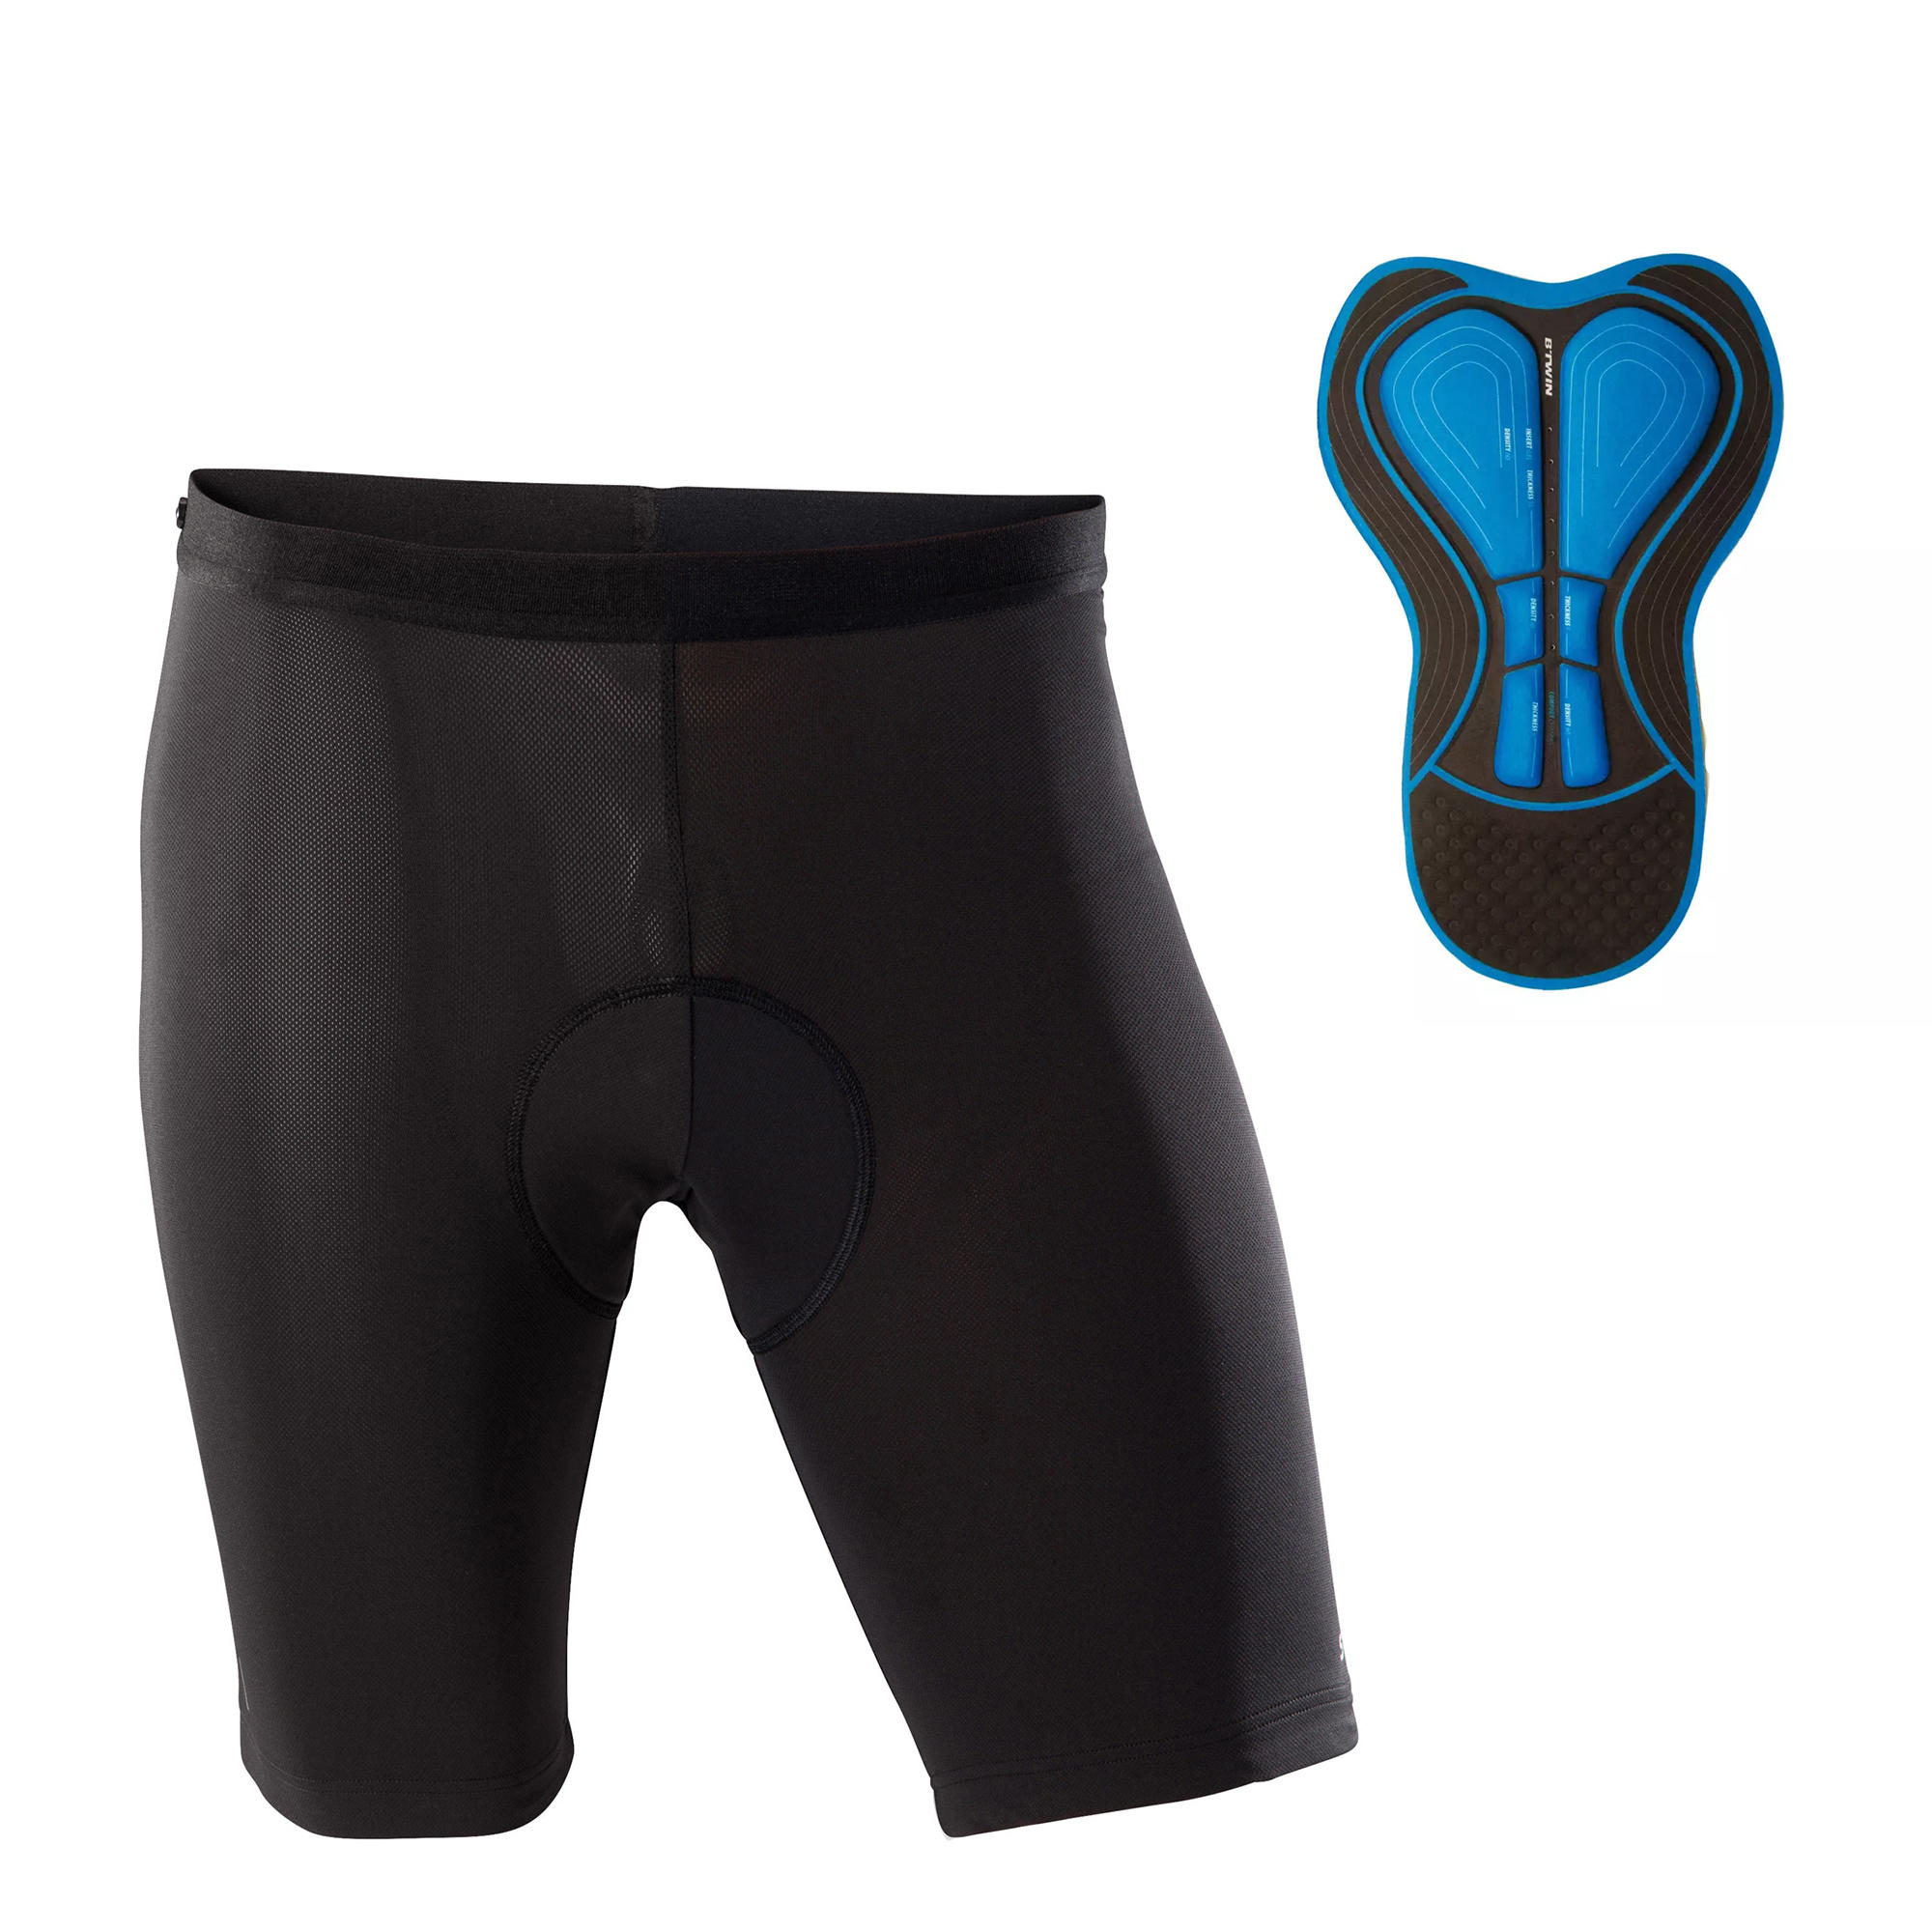 gel shorts for cycling